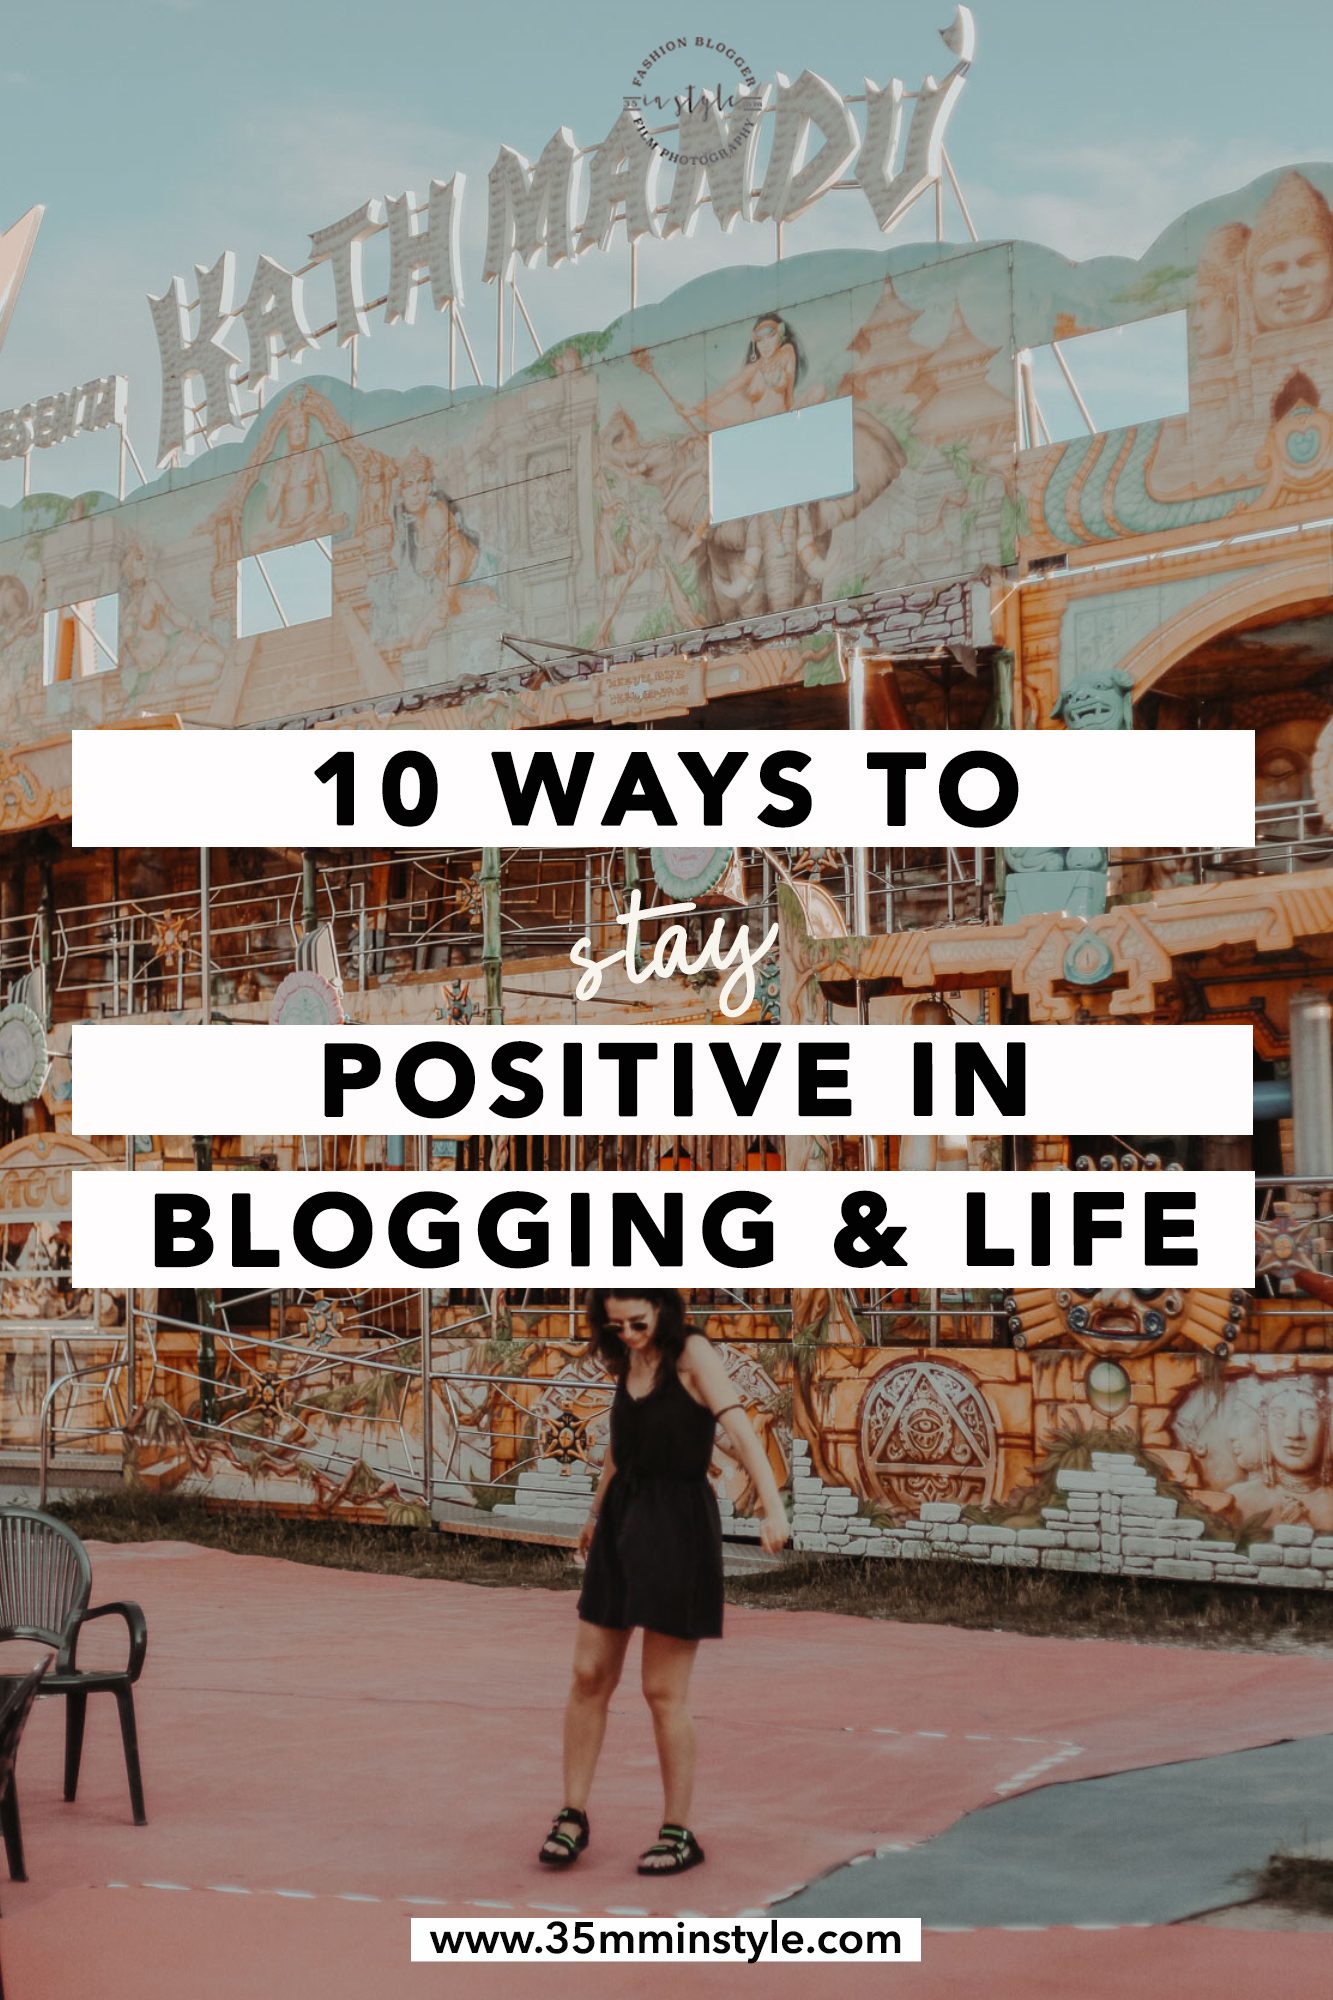 10 Ways To Stay Positive in Blogging And Life